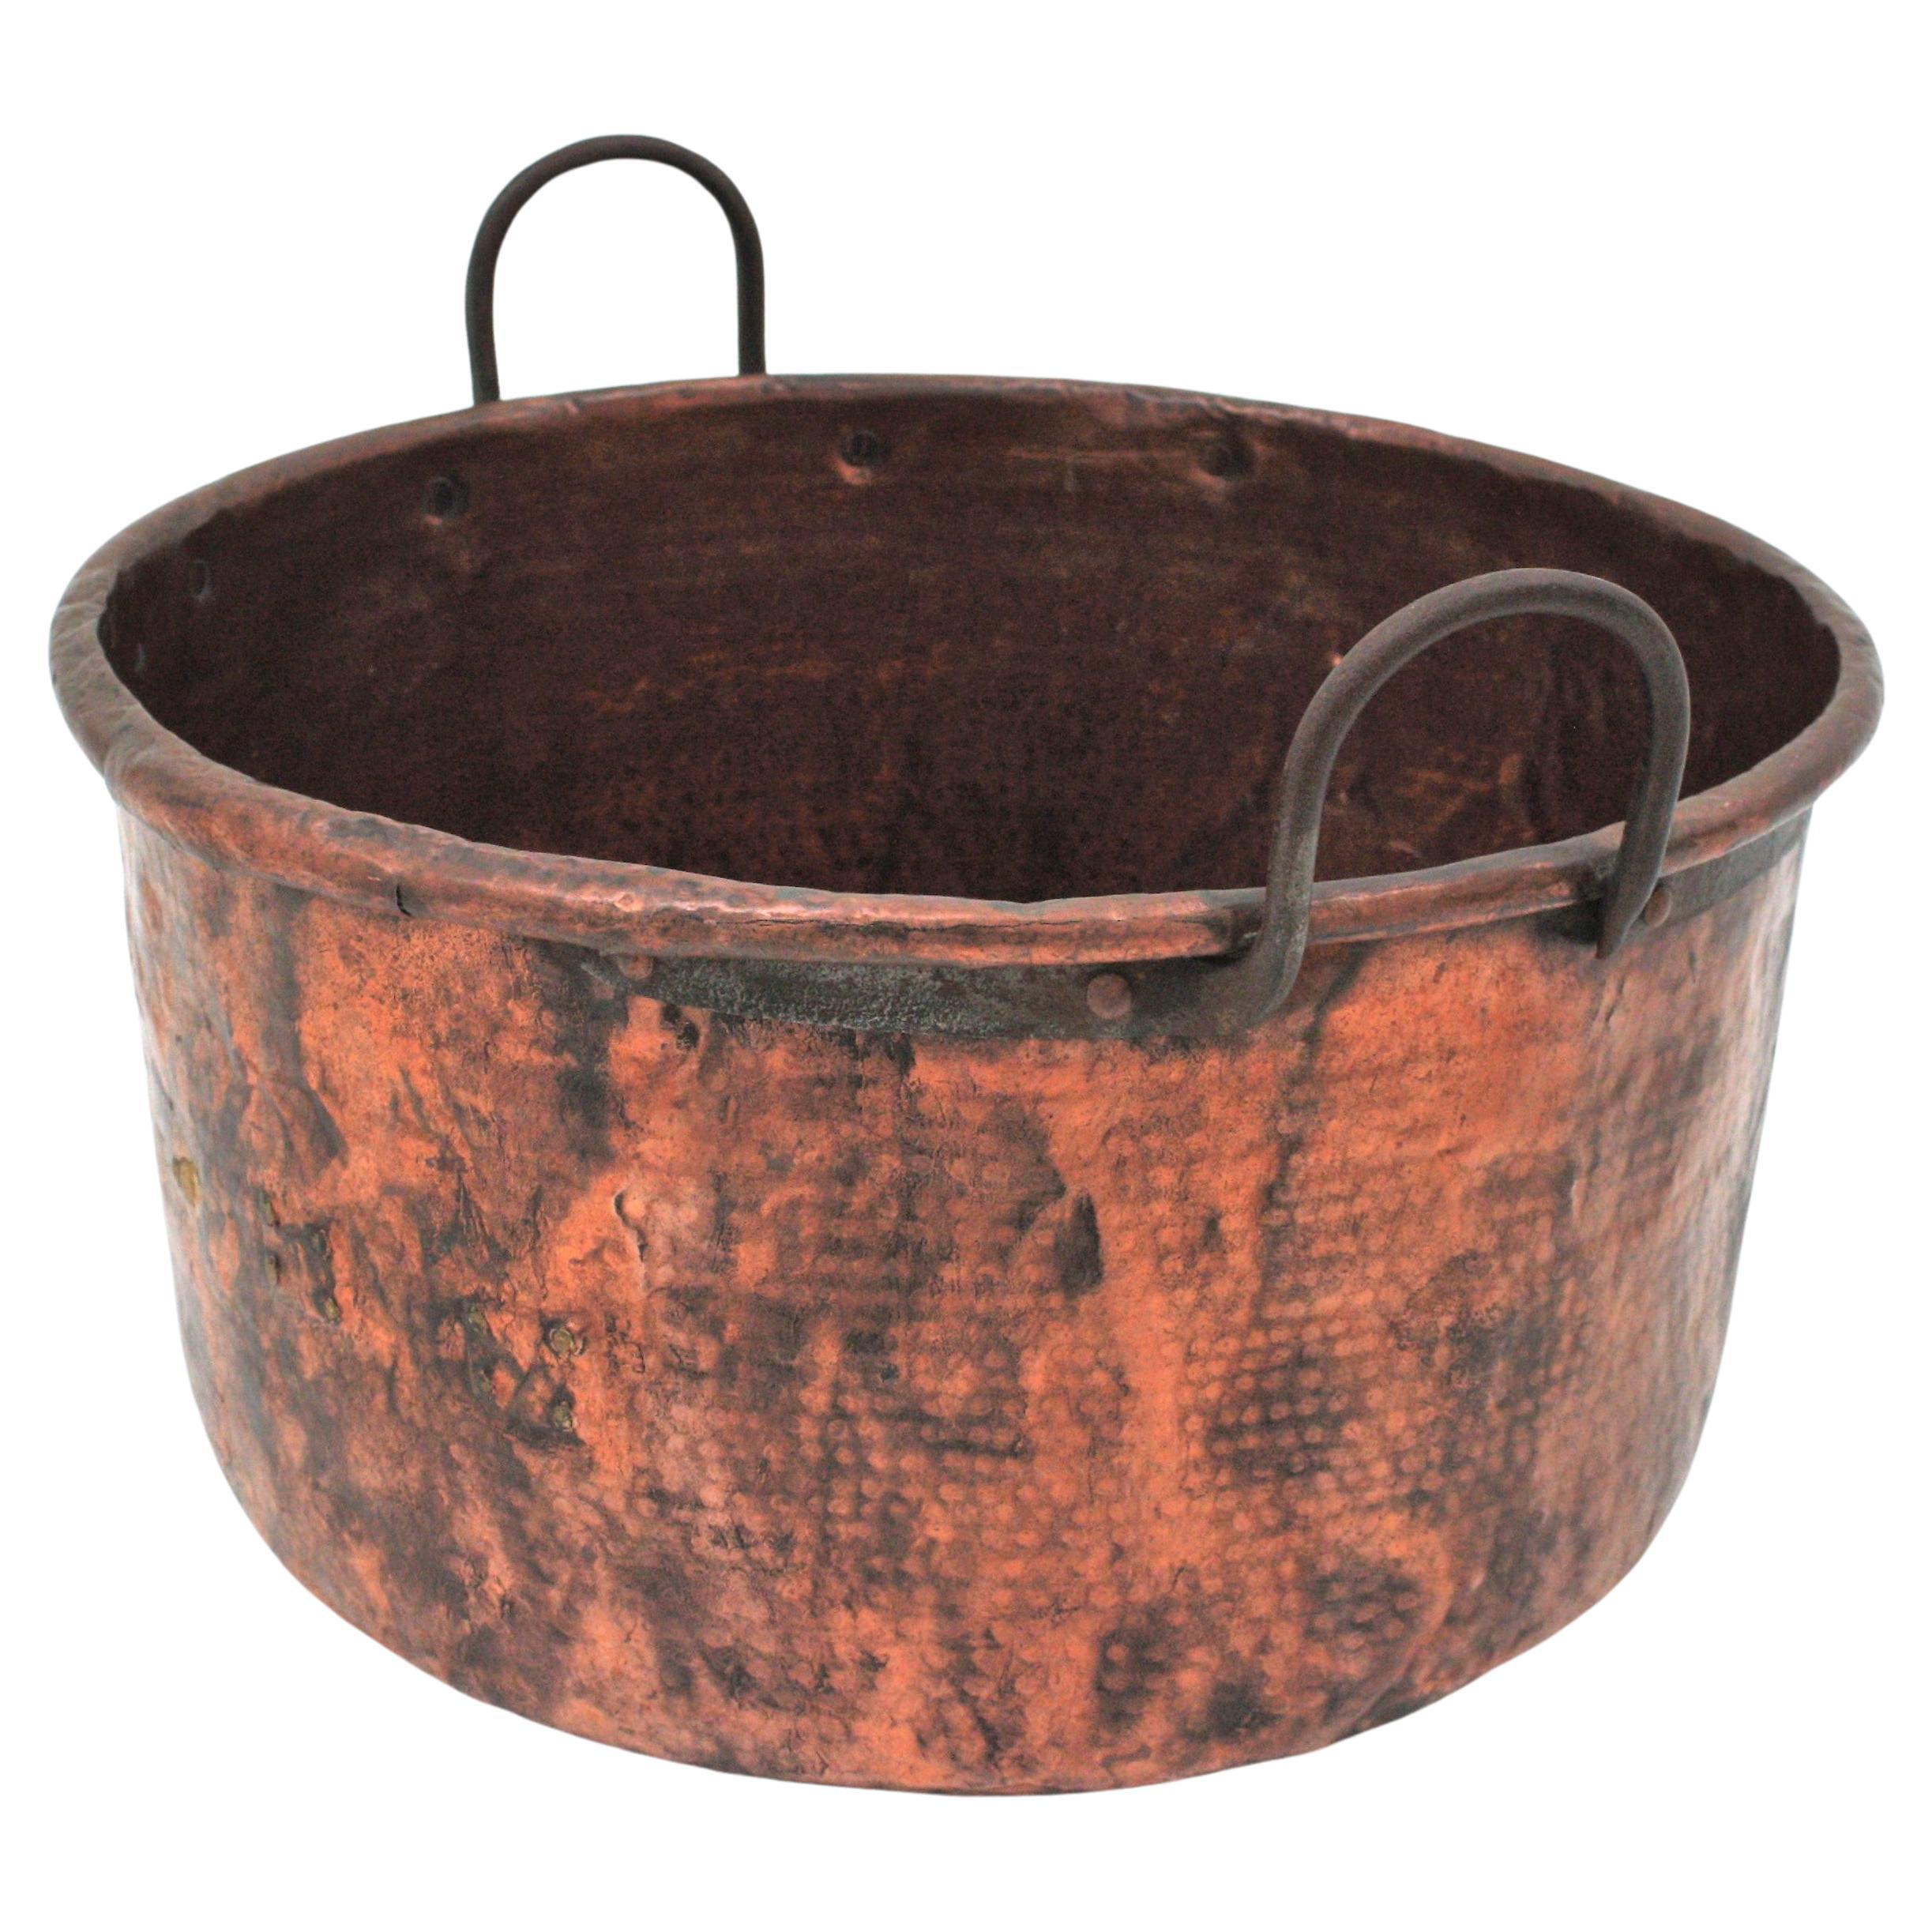 Oversized hand-hammered copper cauldron with iron handles. France, early 20th century.
This handcrafted copper cauldron has a terrific aged patina. The copper is heavily adorned by the hammer marks. 
The iron handles are attached to the cauldron